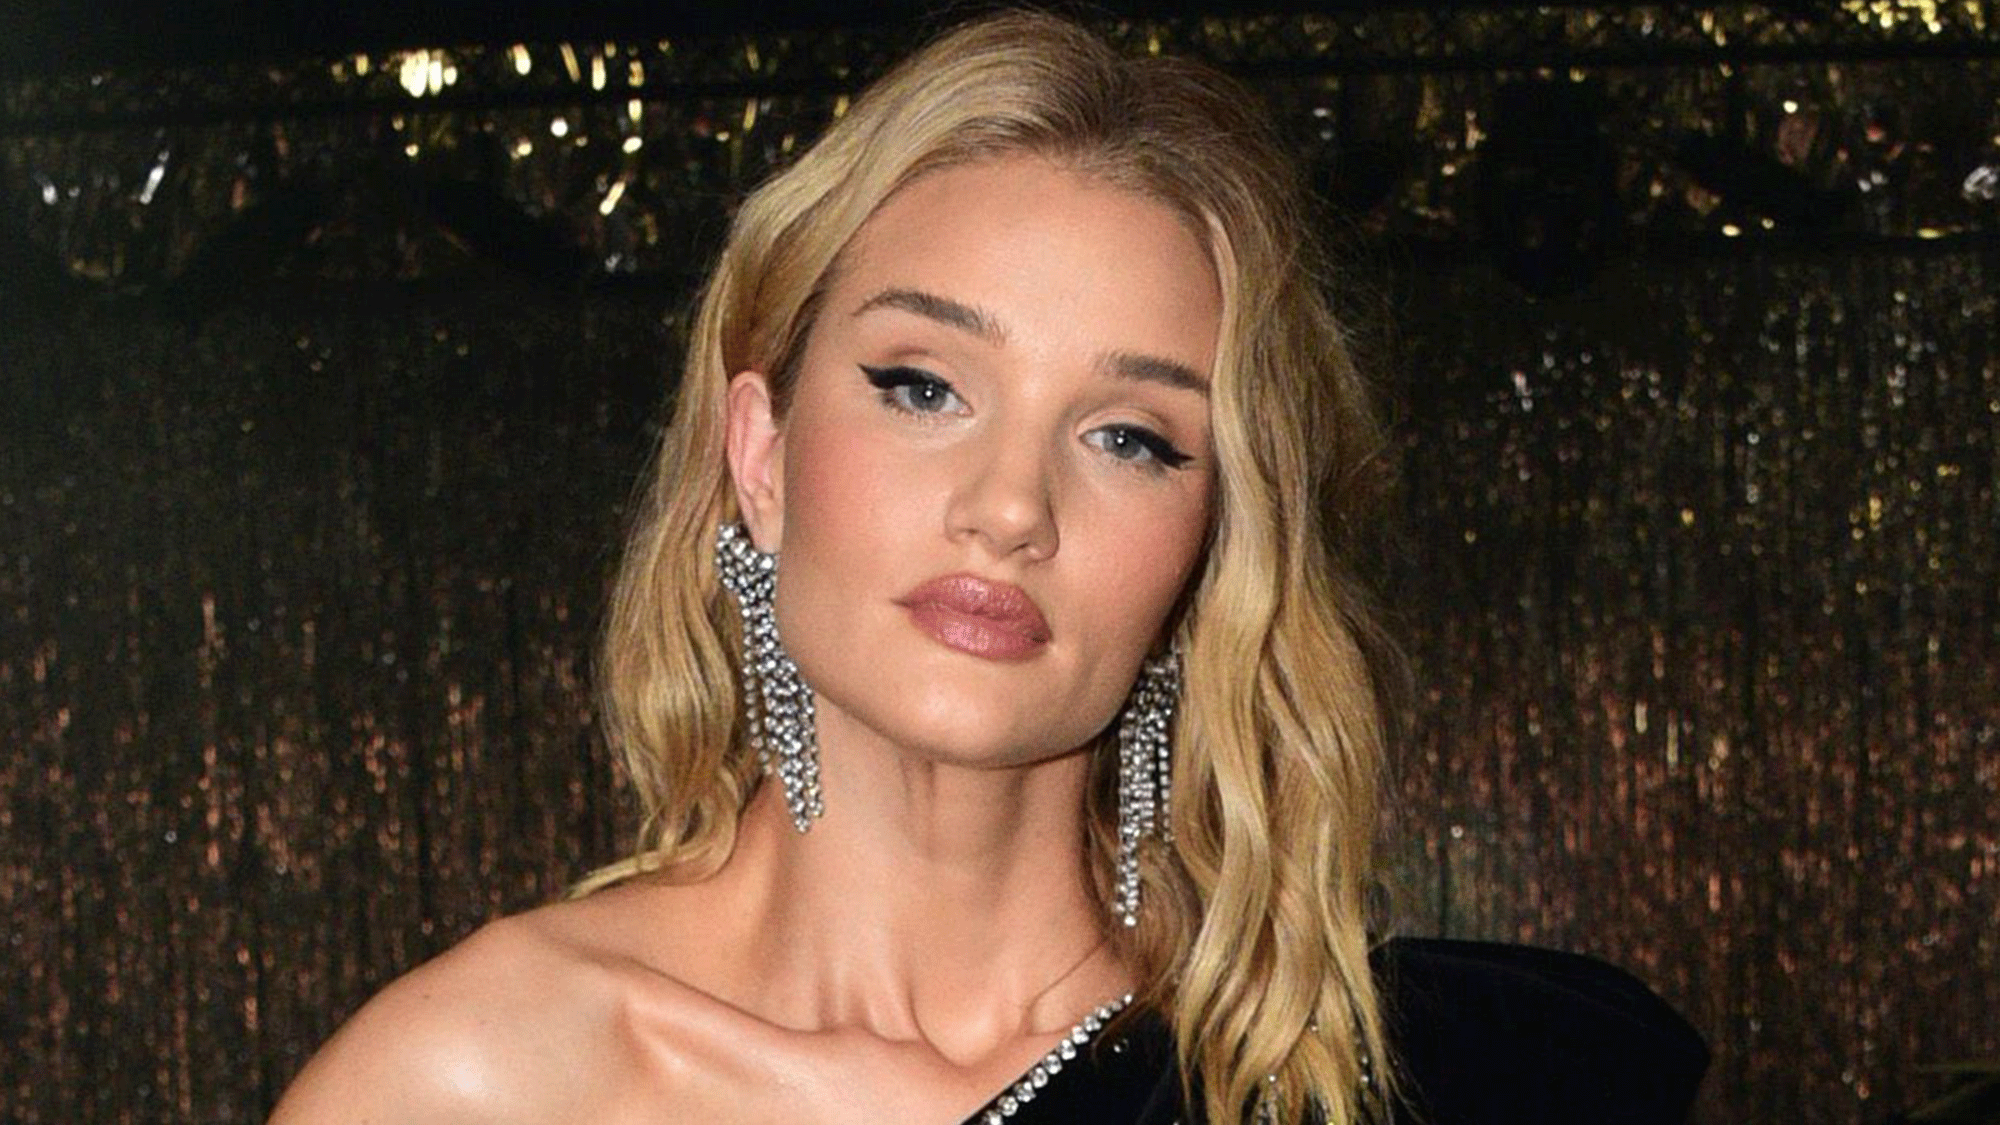 Makeup tips and tricks used by Rosie Huntington-Whiteley’s MUA